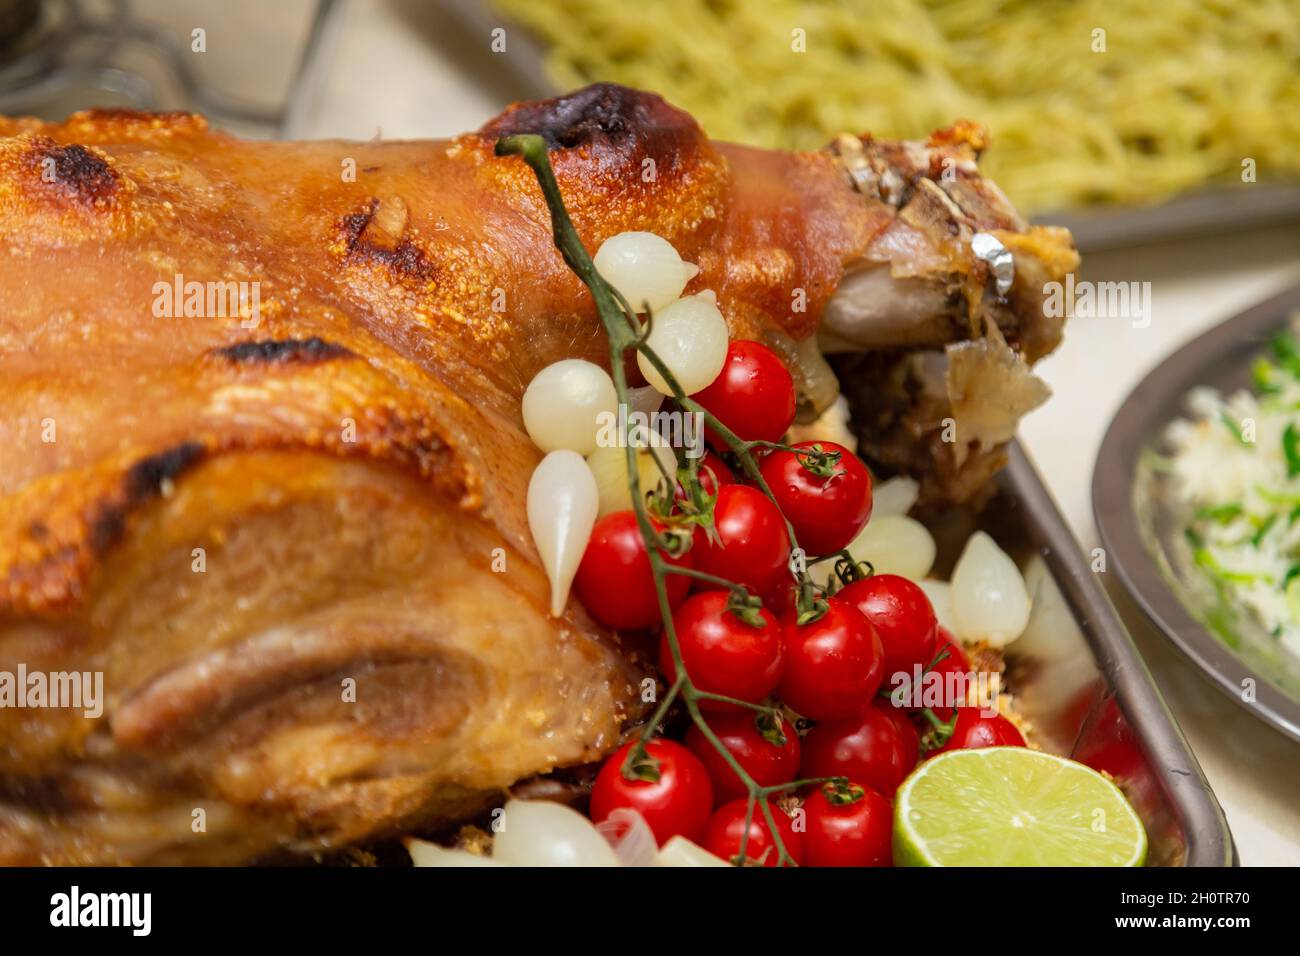 Detail of oven-roasted meat, rice and pasta dishes, on a buffet table for a birthday party. Stock Photo